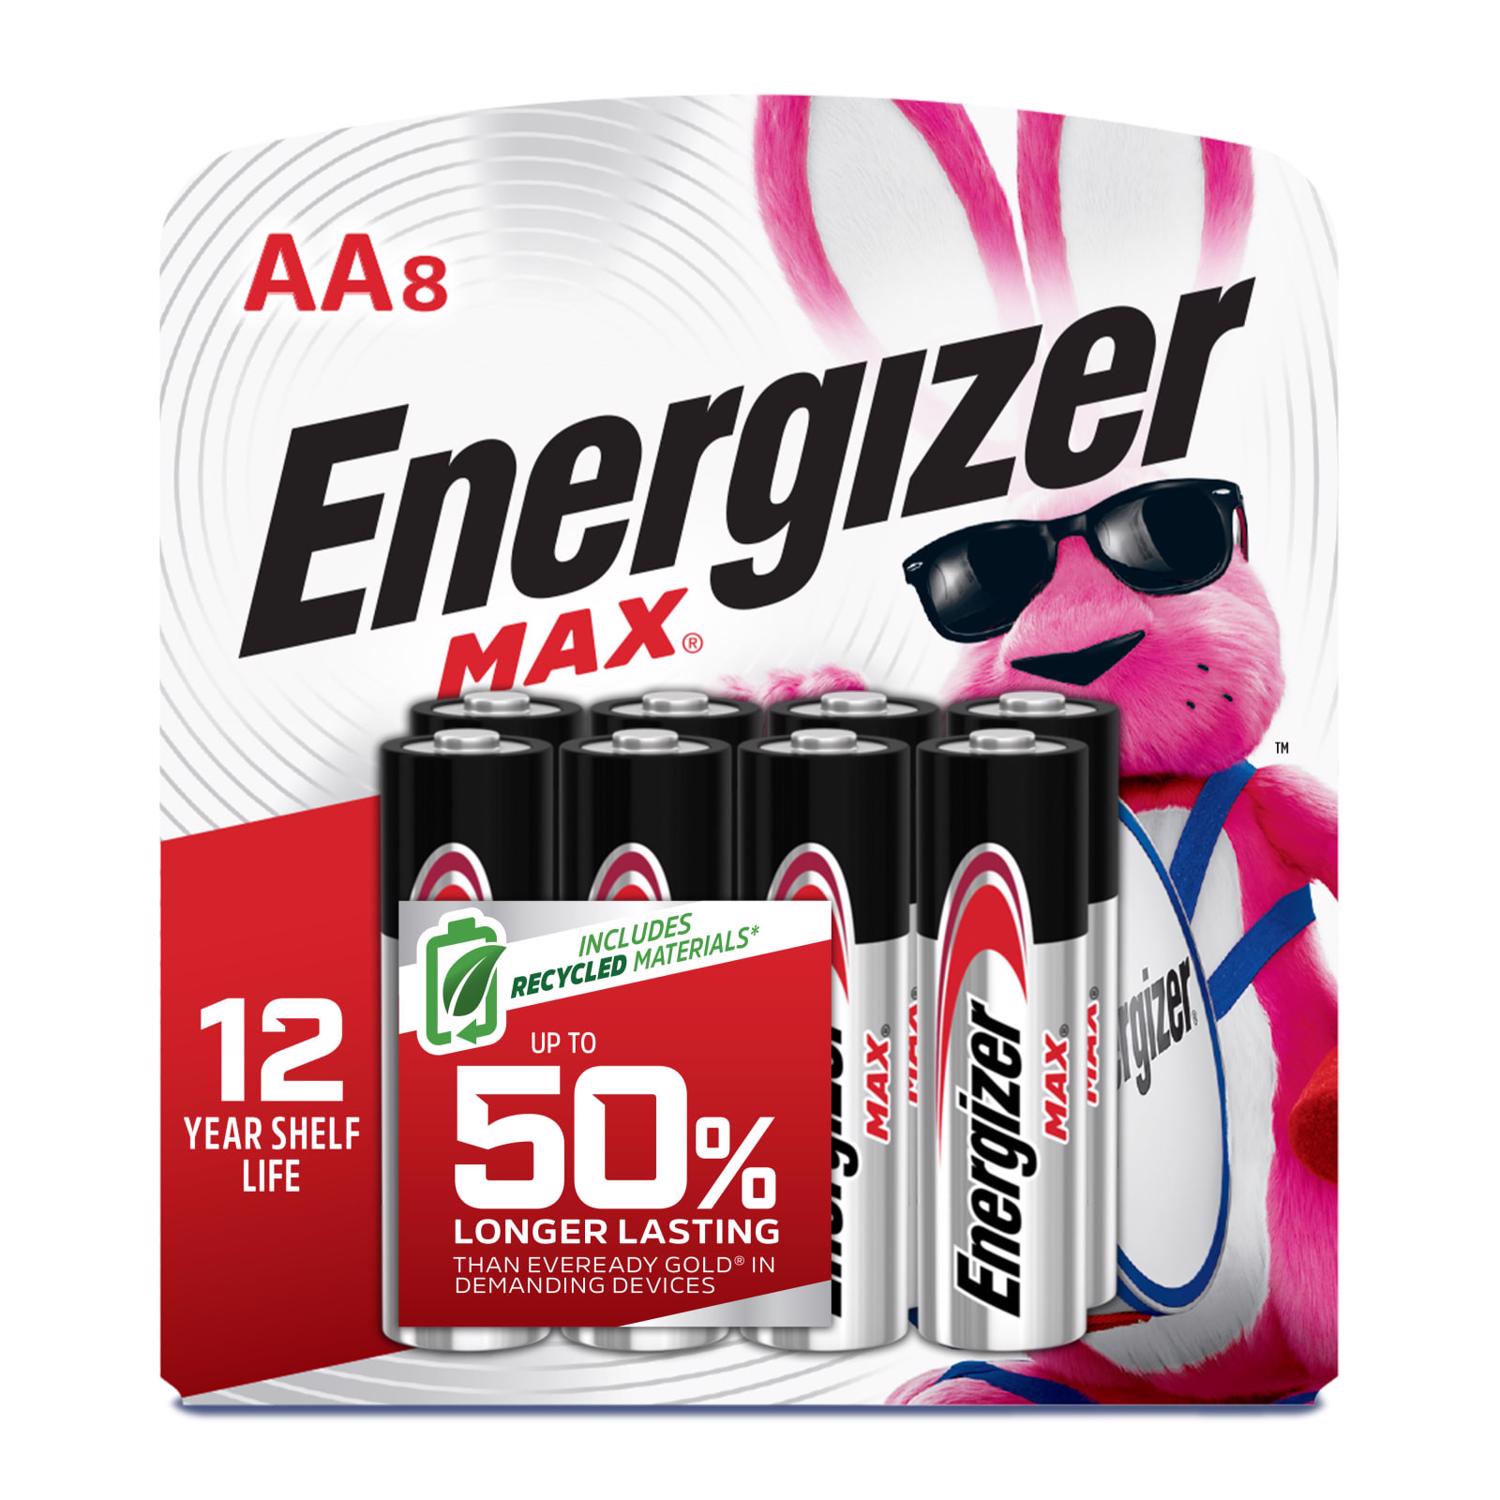 Photos - Household Switch Energizer Max Premium AA Alkaline Batteries 8 pk Carded E91MP-8 